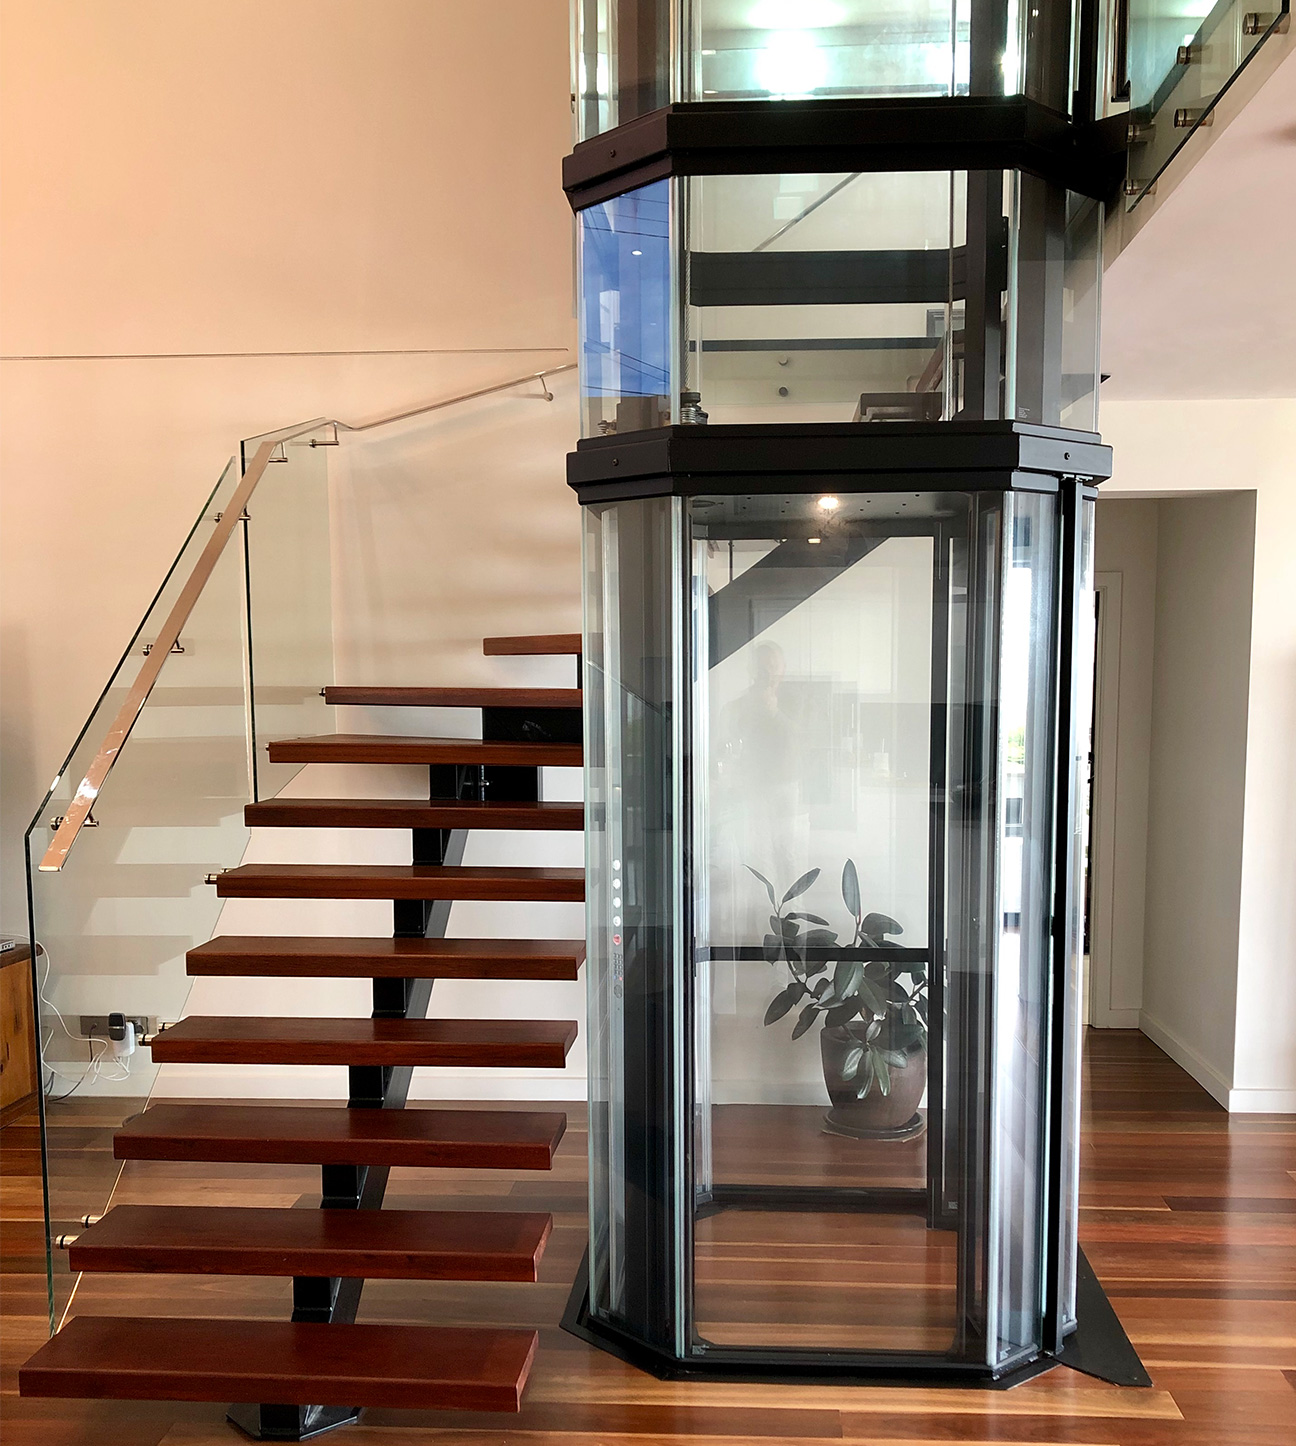 Free standing specialty home elevators with glass walls